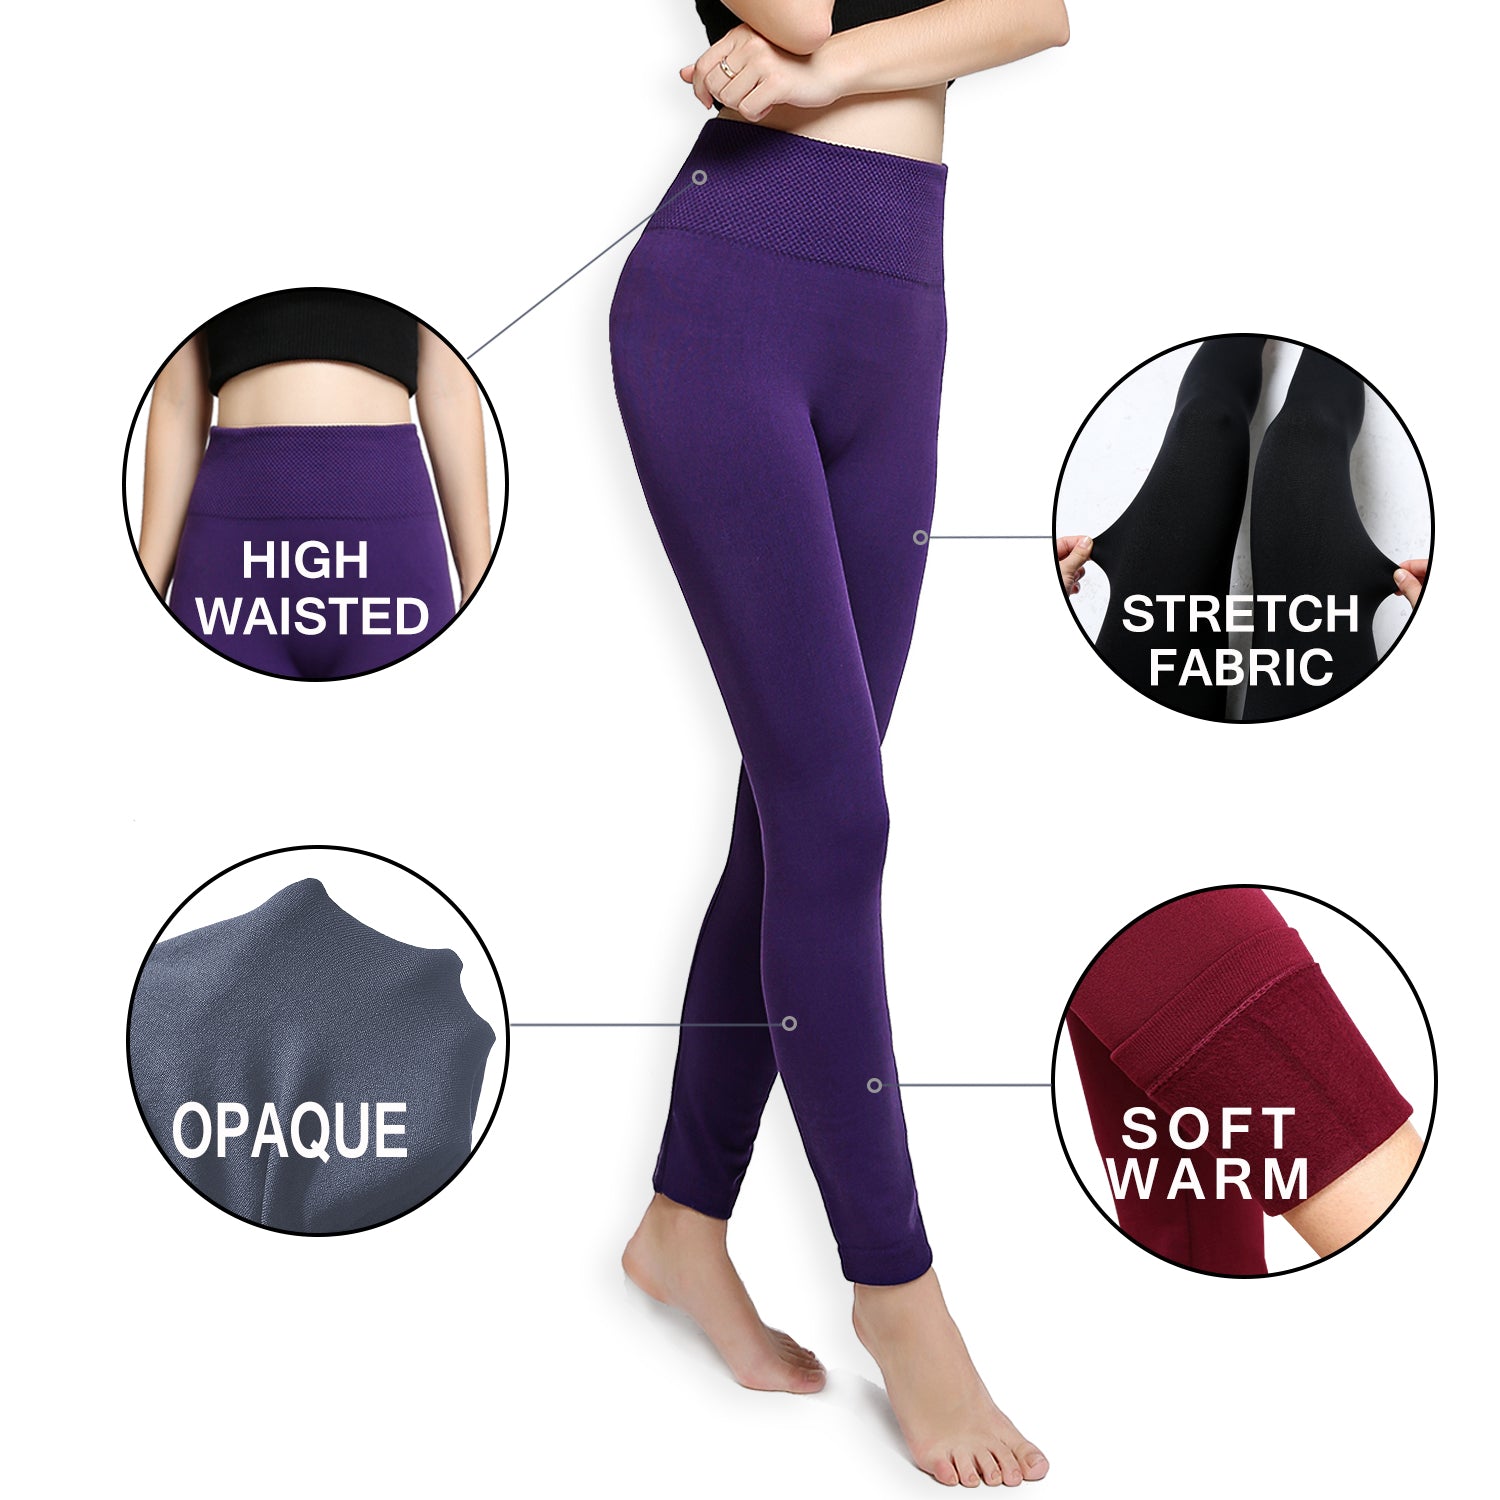 Fleece Lined Leggings Ultra Soft Warm High Waist Tights For Women (3 or 6  Pack)